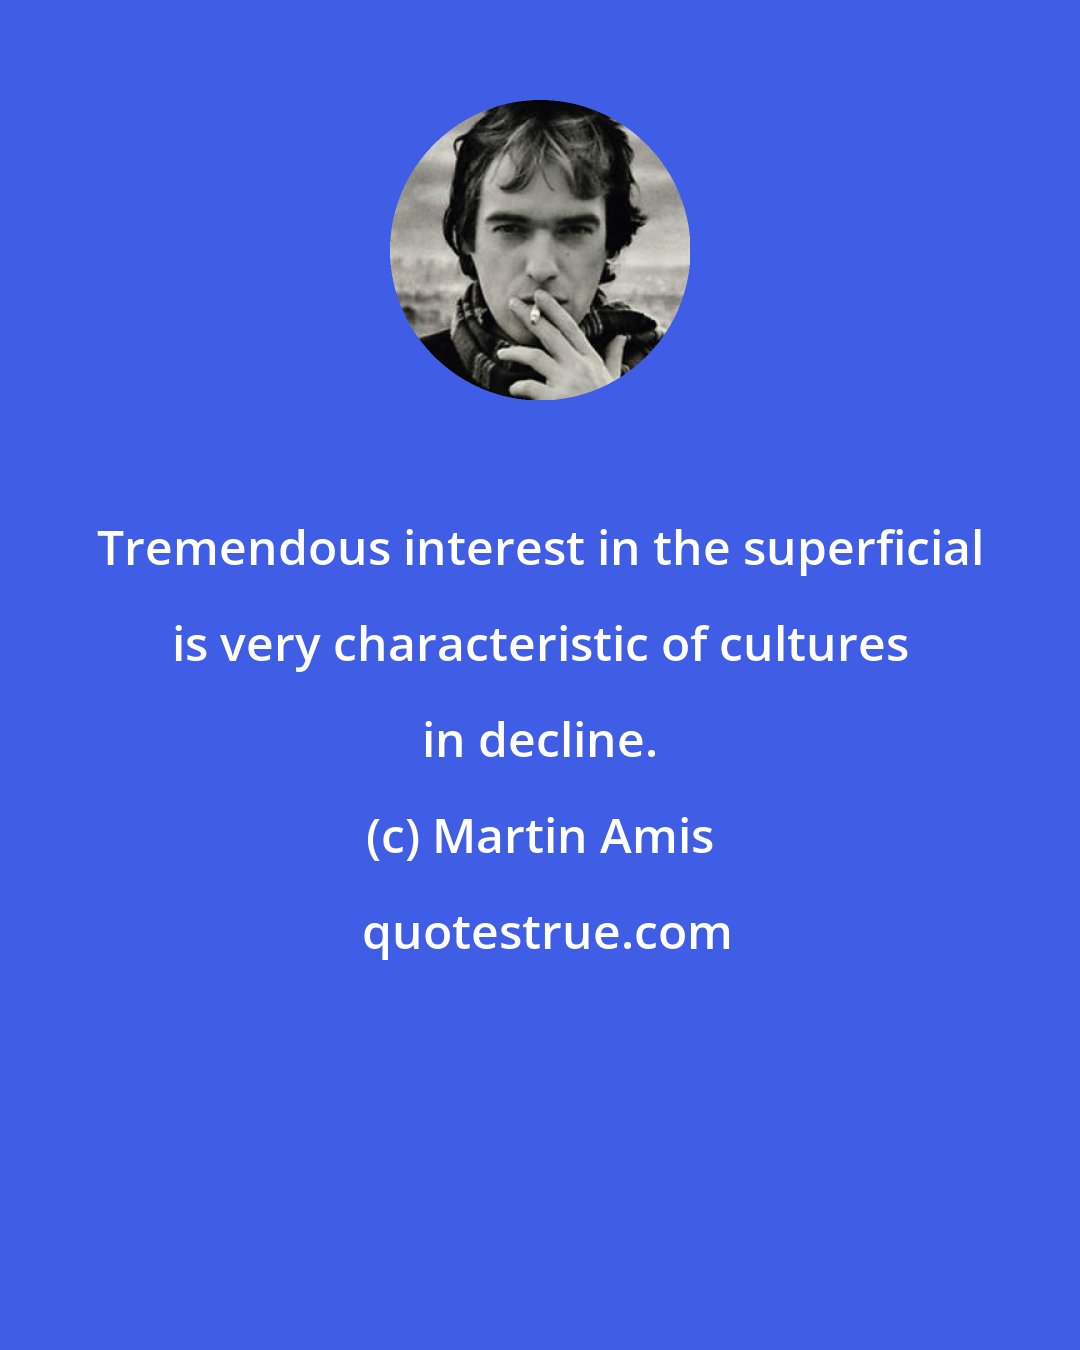 Martin Amis: Tremendous interest in the superficial is very characteristic of cultures in decline.